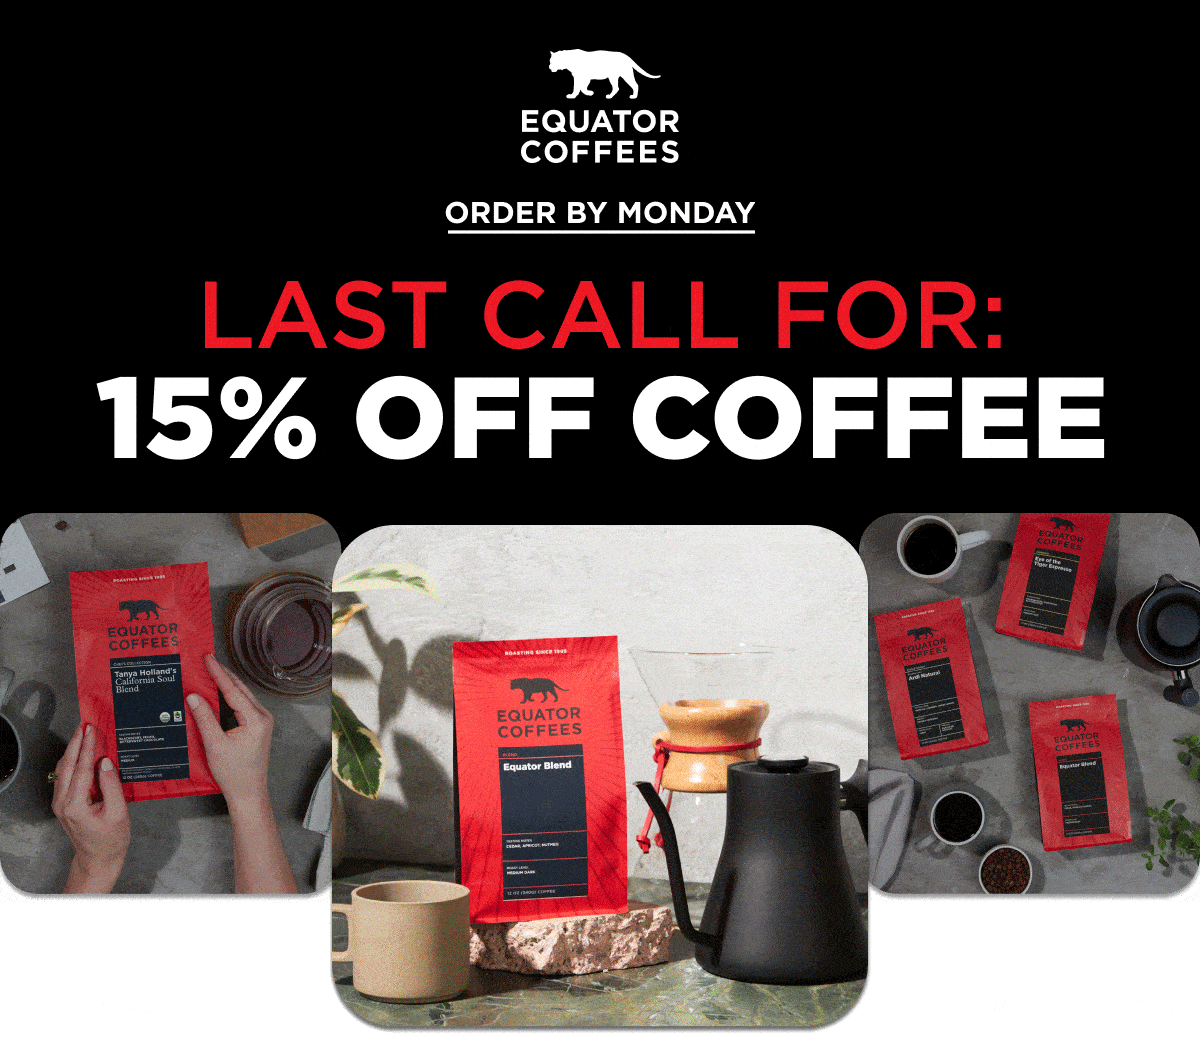 Just for You: 15% OFF Coffee